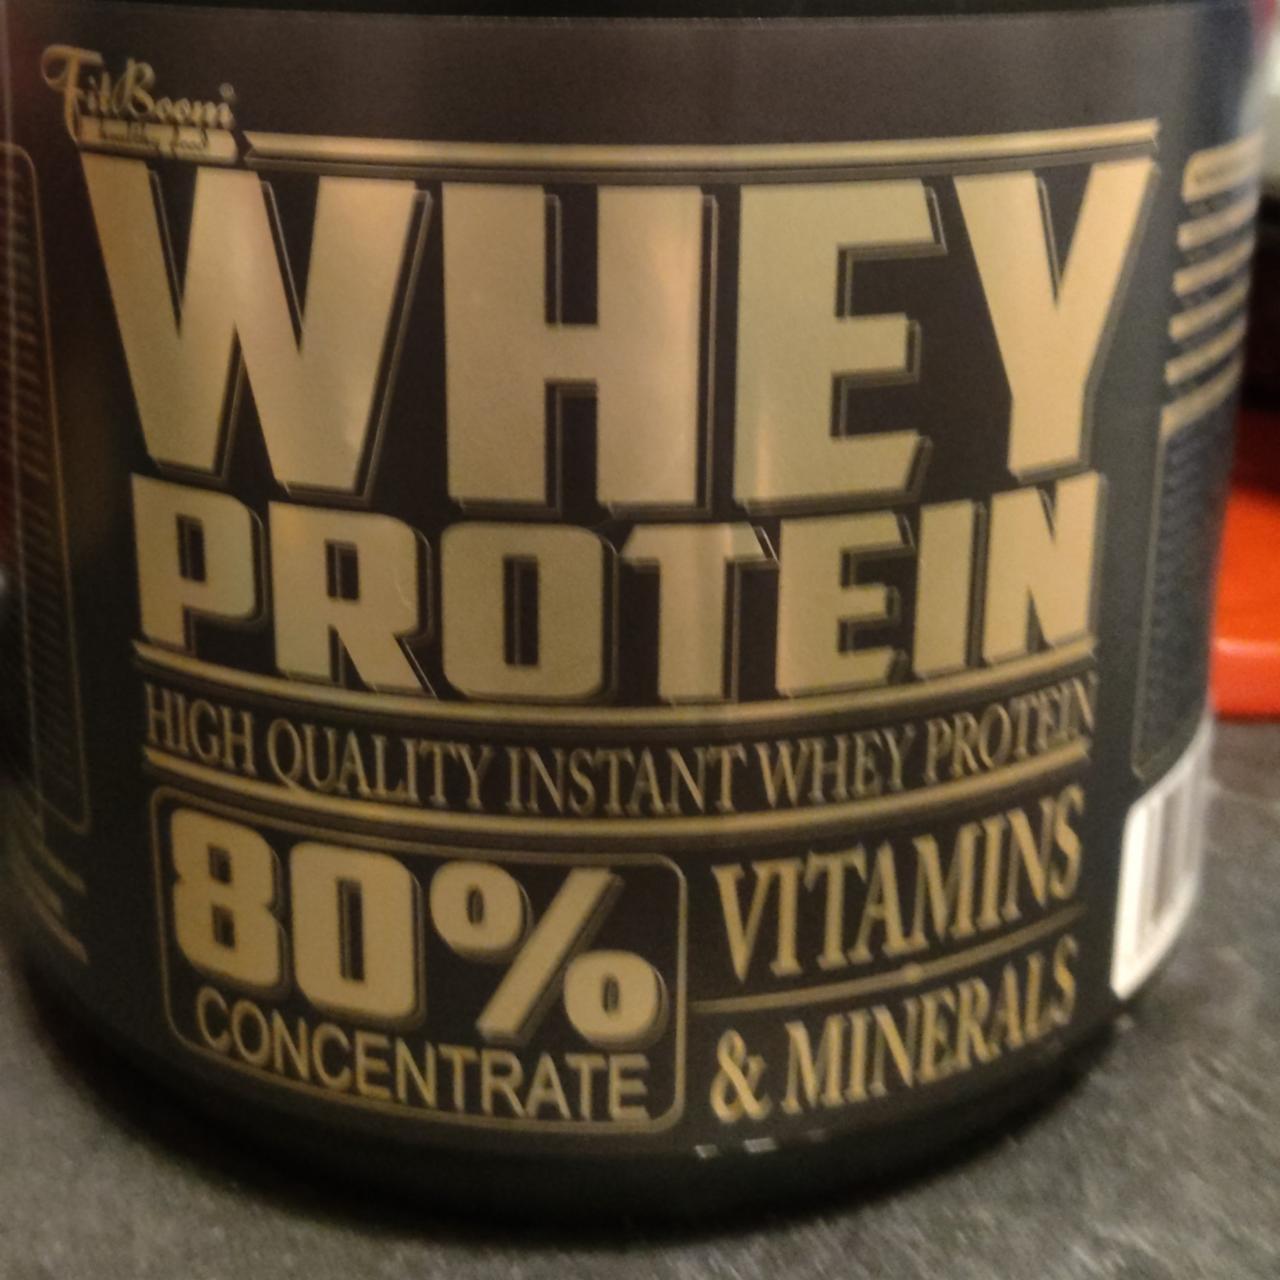 Fotografie - Whey protein high quality instant whey protein FitBoom